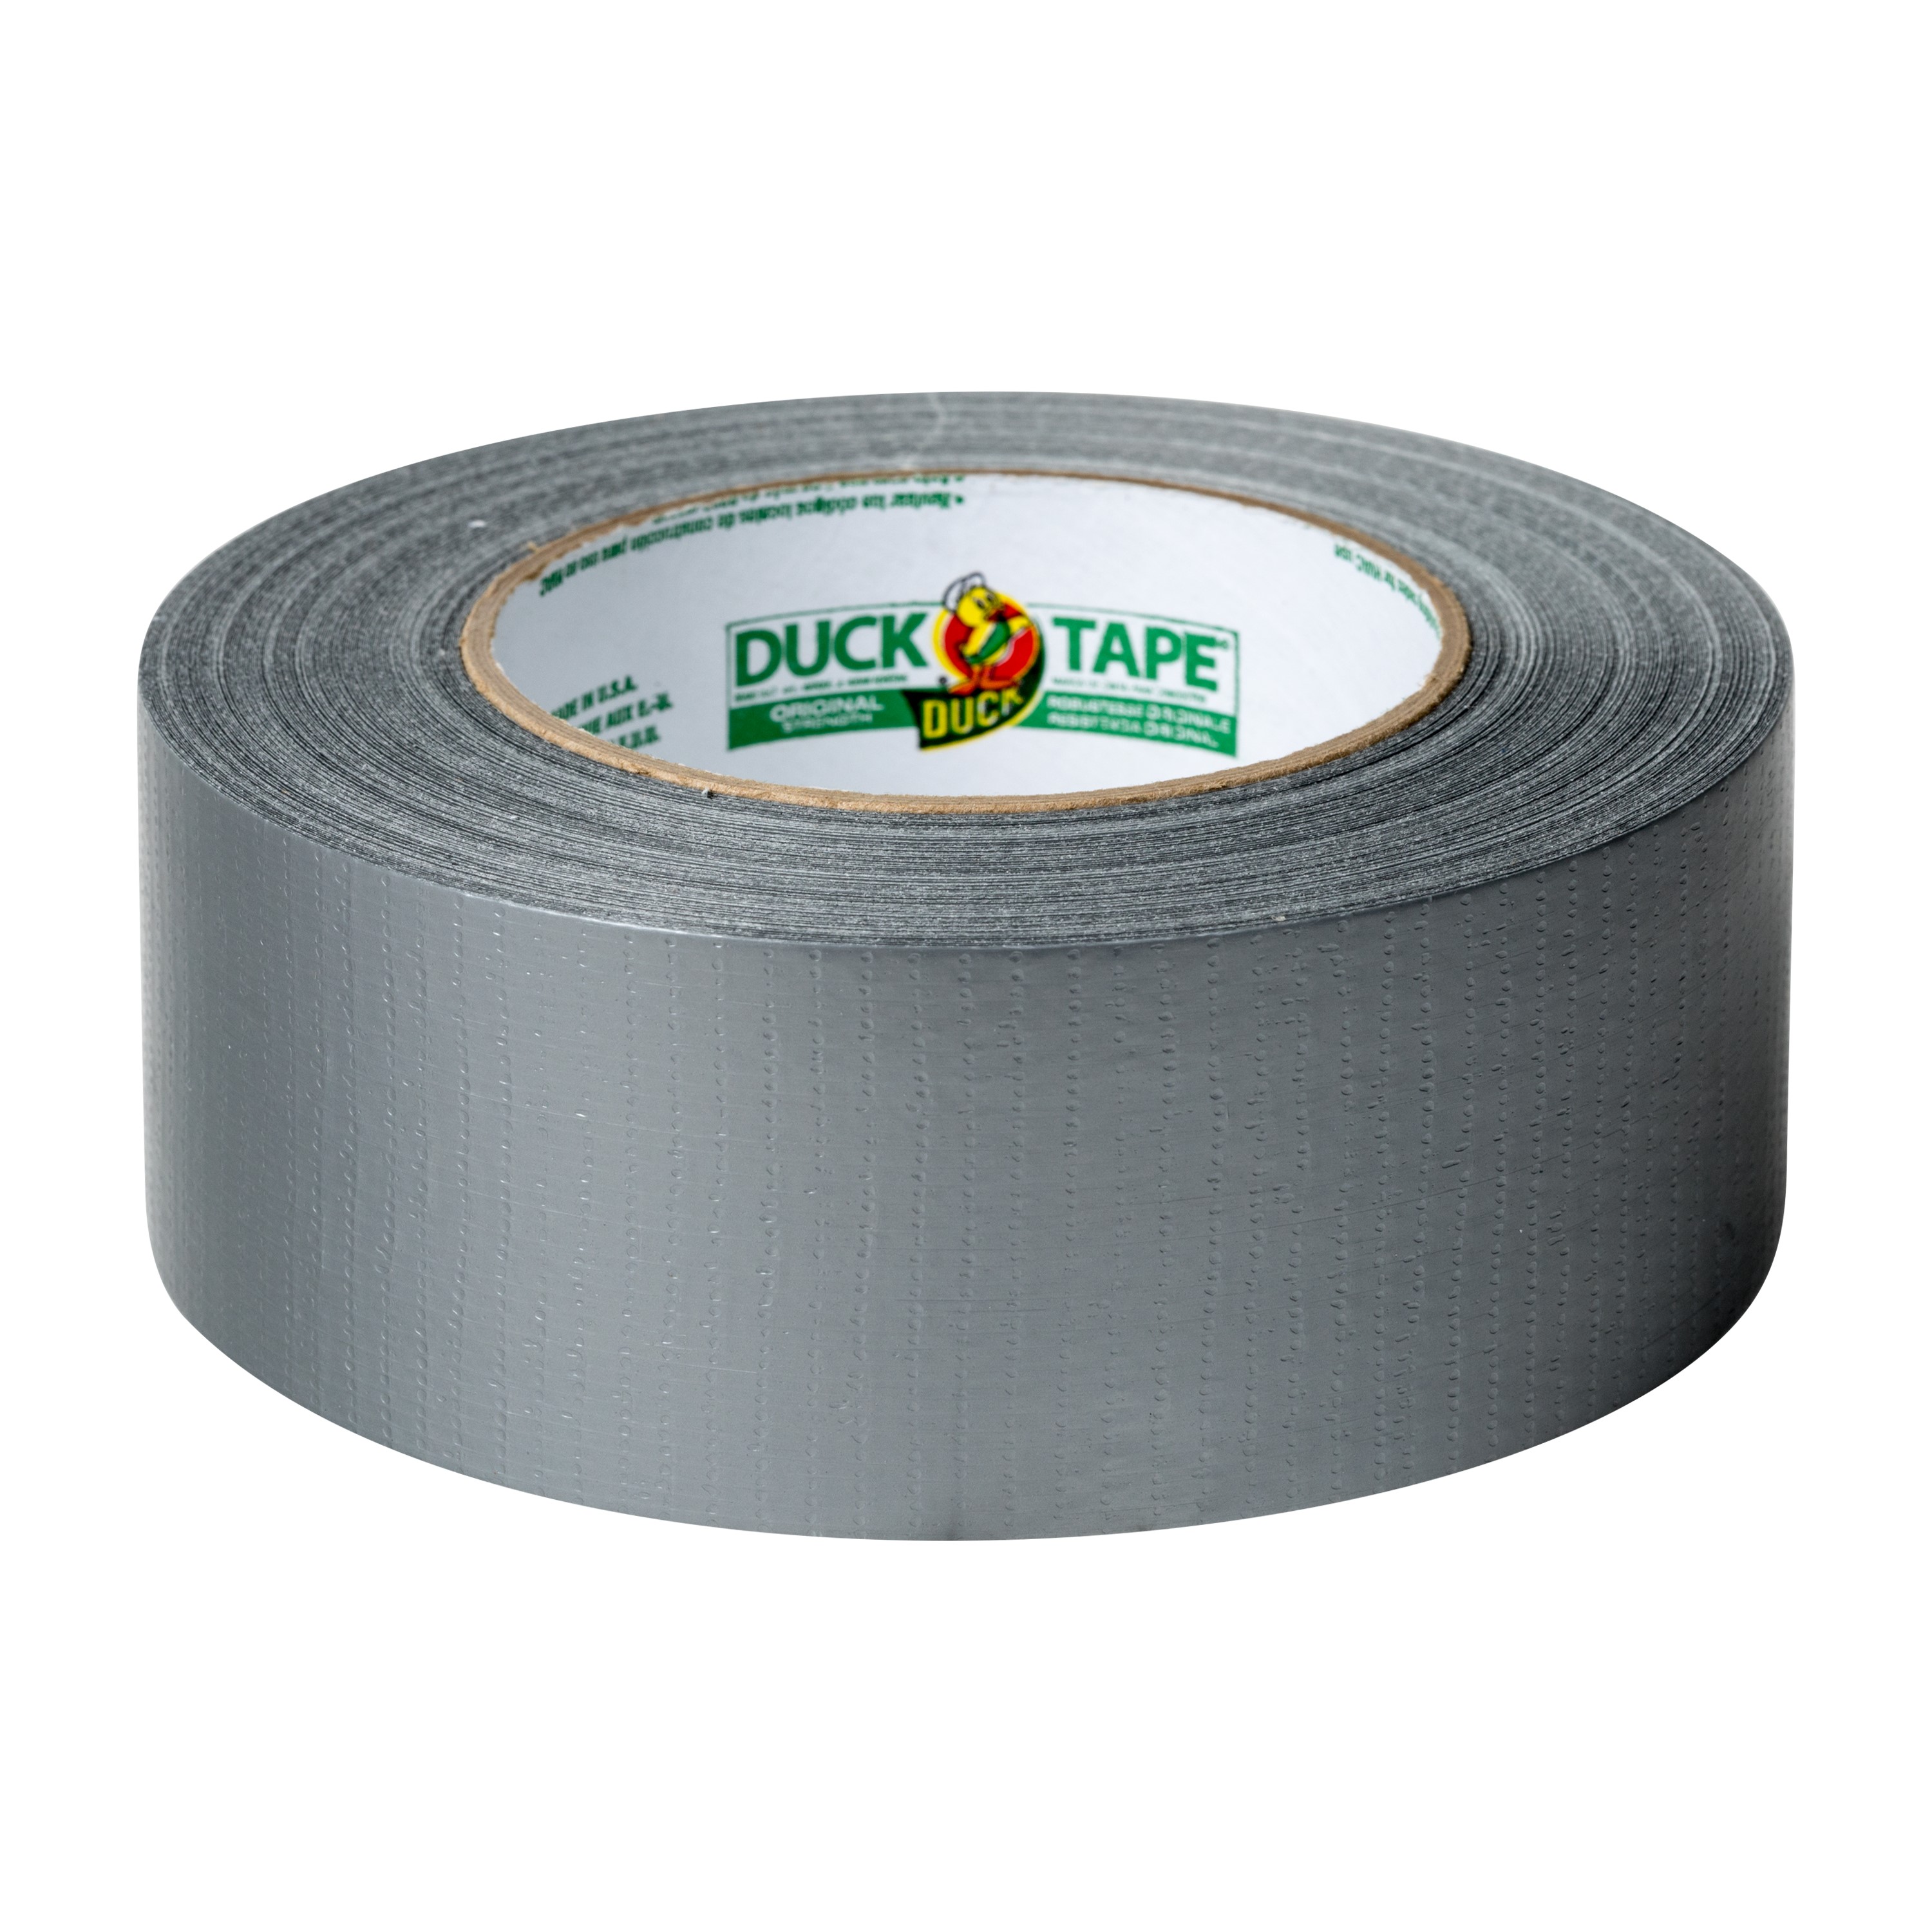 Duck Brand Original Strength Duct Tape, 1.88 in. x 55 yds., Silver - image 4 of 9